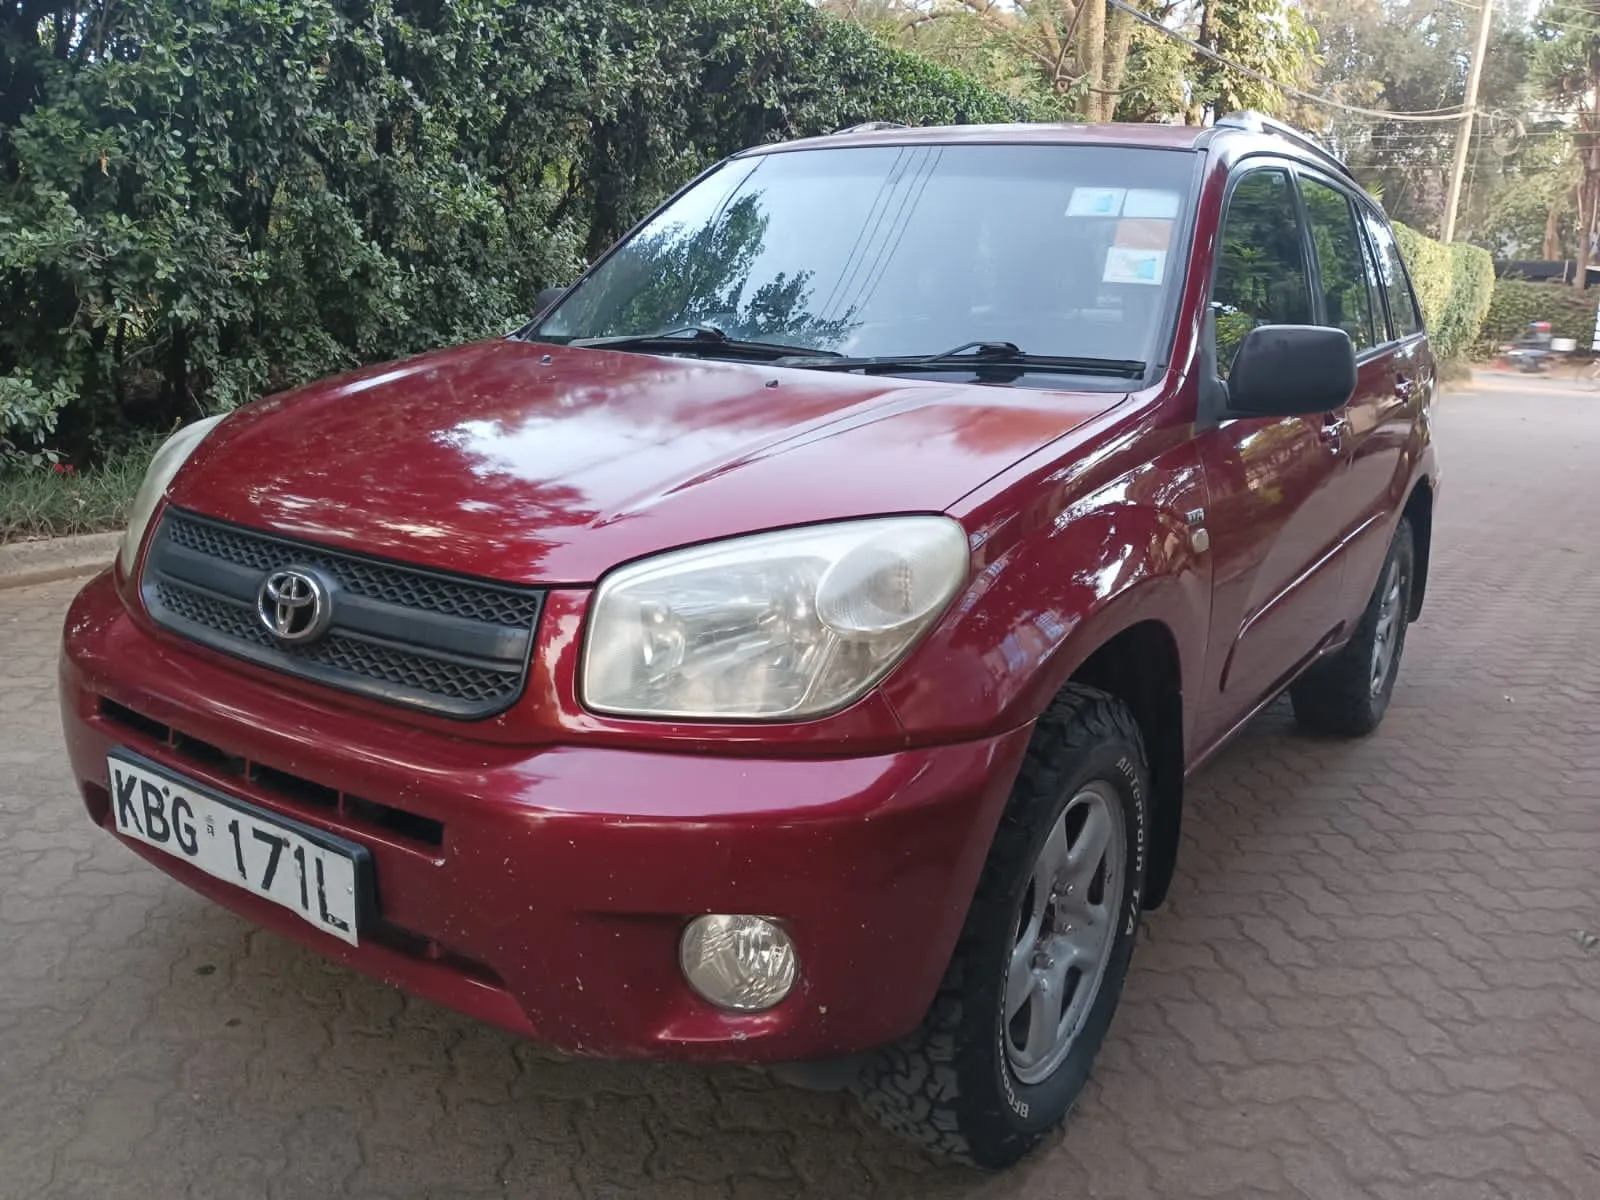 Cars Cars For Sale/Vehicles-Toyota RAV4 2004 wine Red pay 20% deposit New Offer 9